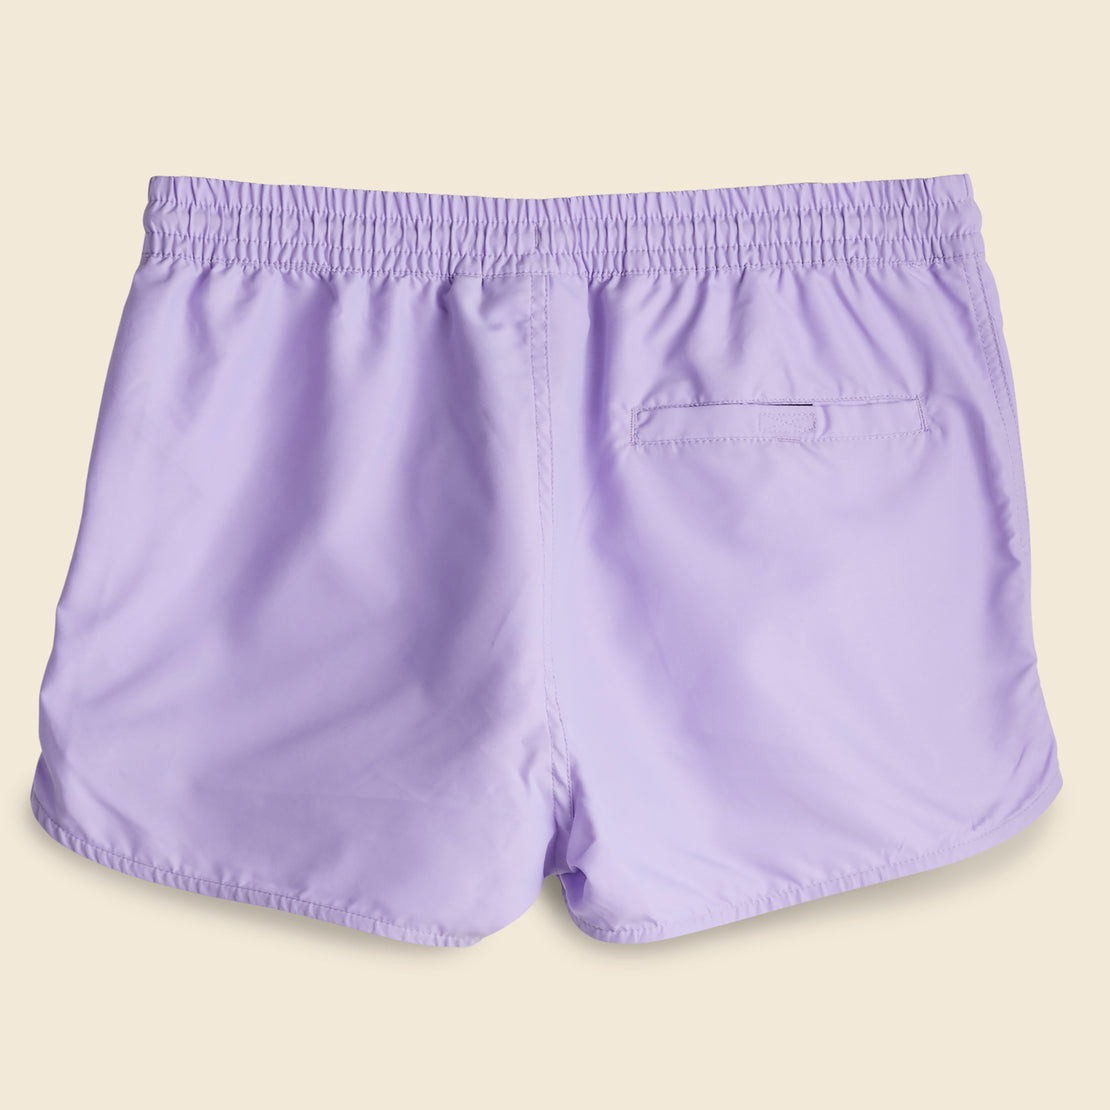 Chase Swim Trunks - Soft Lavender - Carhartt WIP - STAG Provisions - W - Shorts - Solid